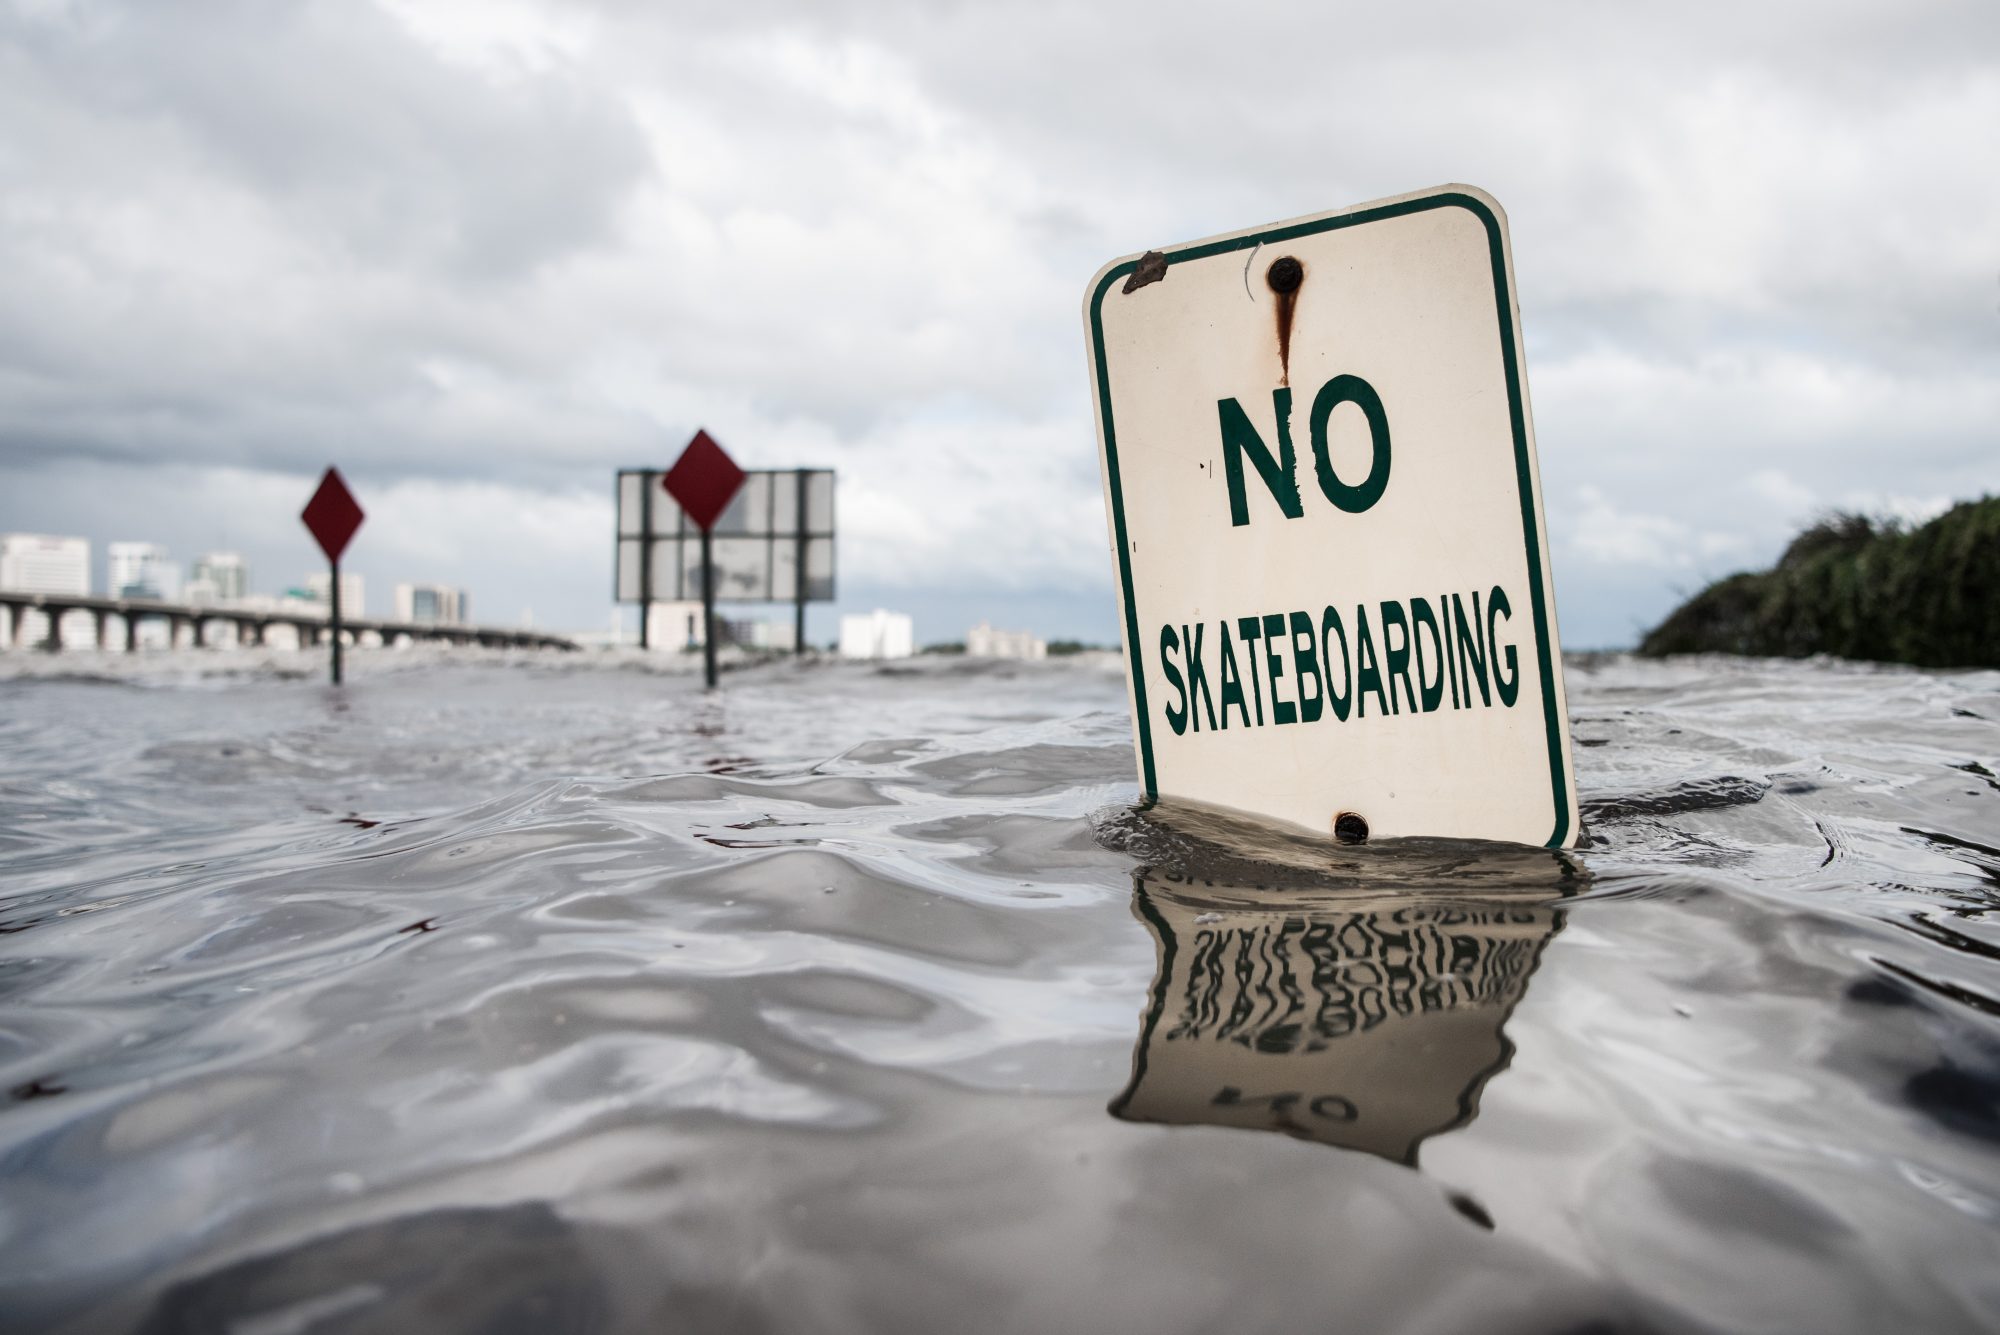 JACKSONVILLE, FL - SEPTEMBER 11: The St. Johns River rises from storm surge flood waters from Hurricane Irma on Sept. 11, 2017 in Jacksonville, Florida. Flooding in downtown Jacksonville along the river topped a record set during Hurricane Dora in 1965. (Photo by Sean Rayford/Getty Images)